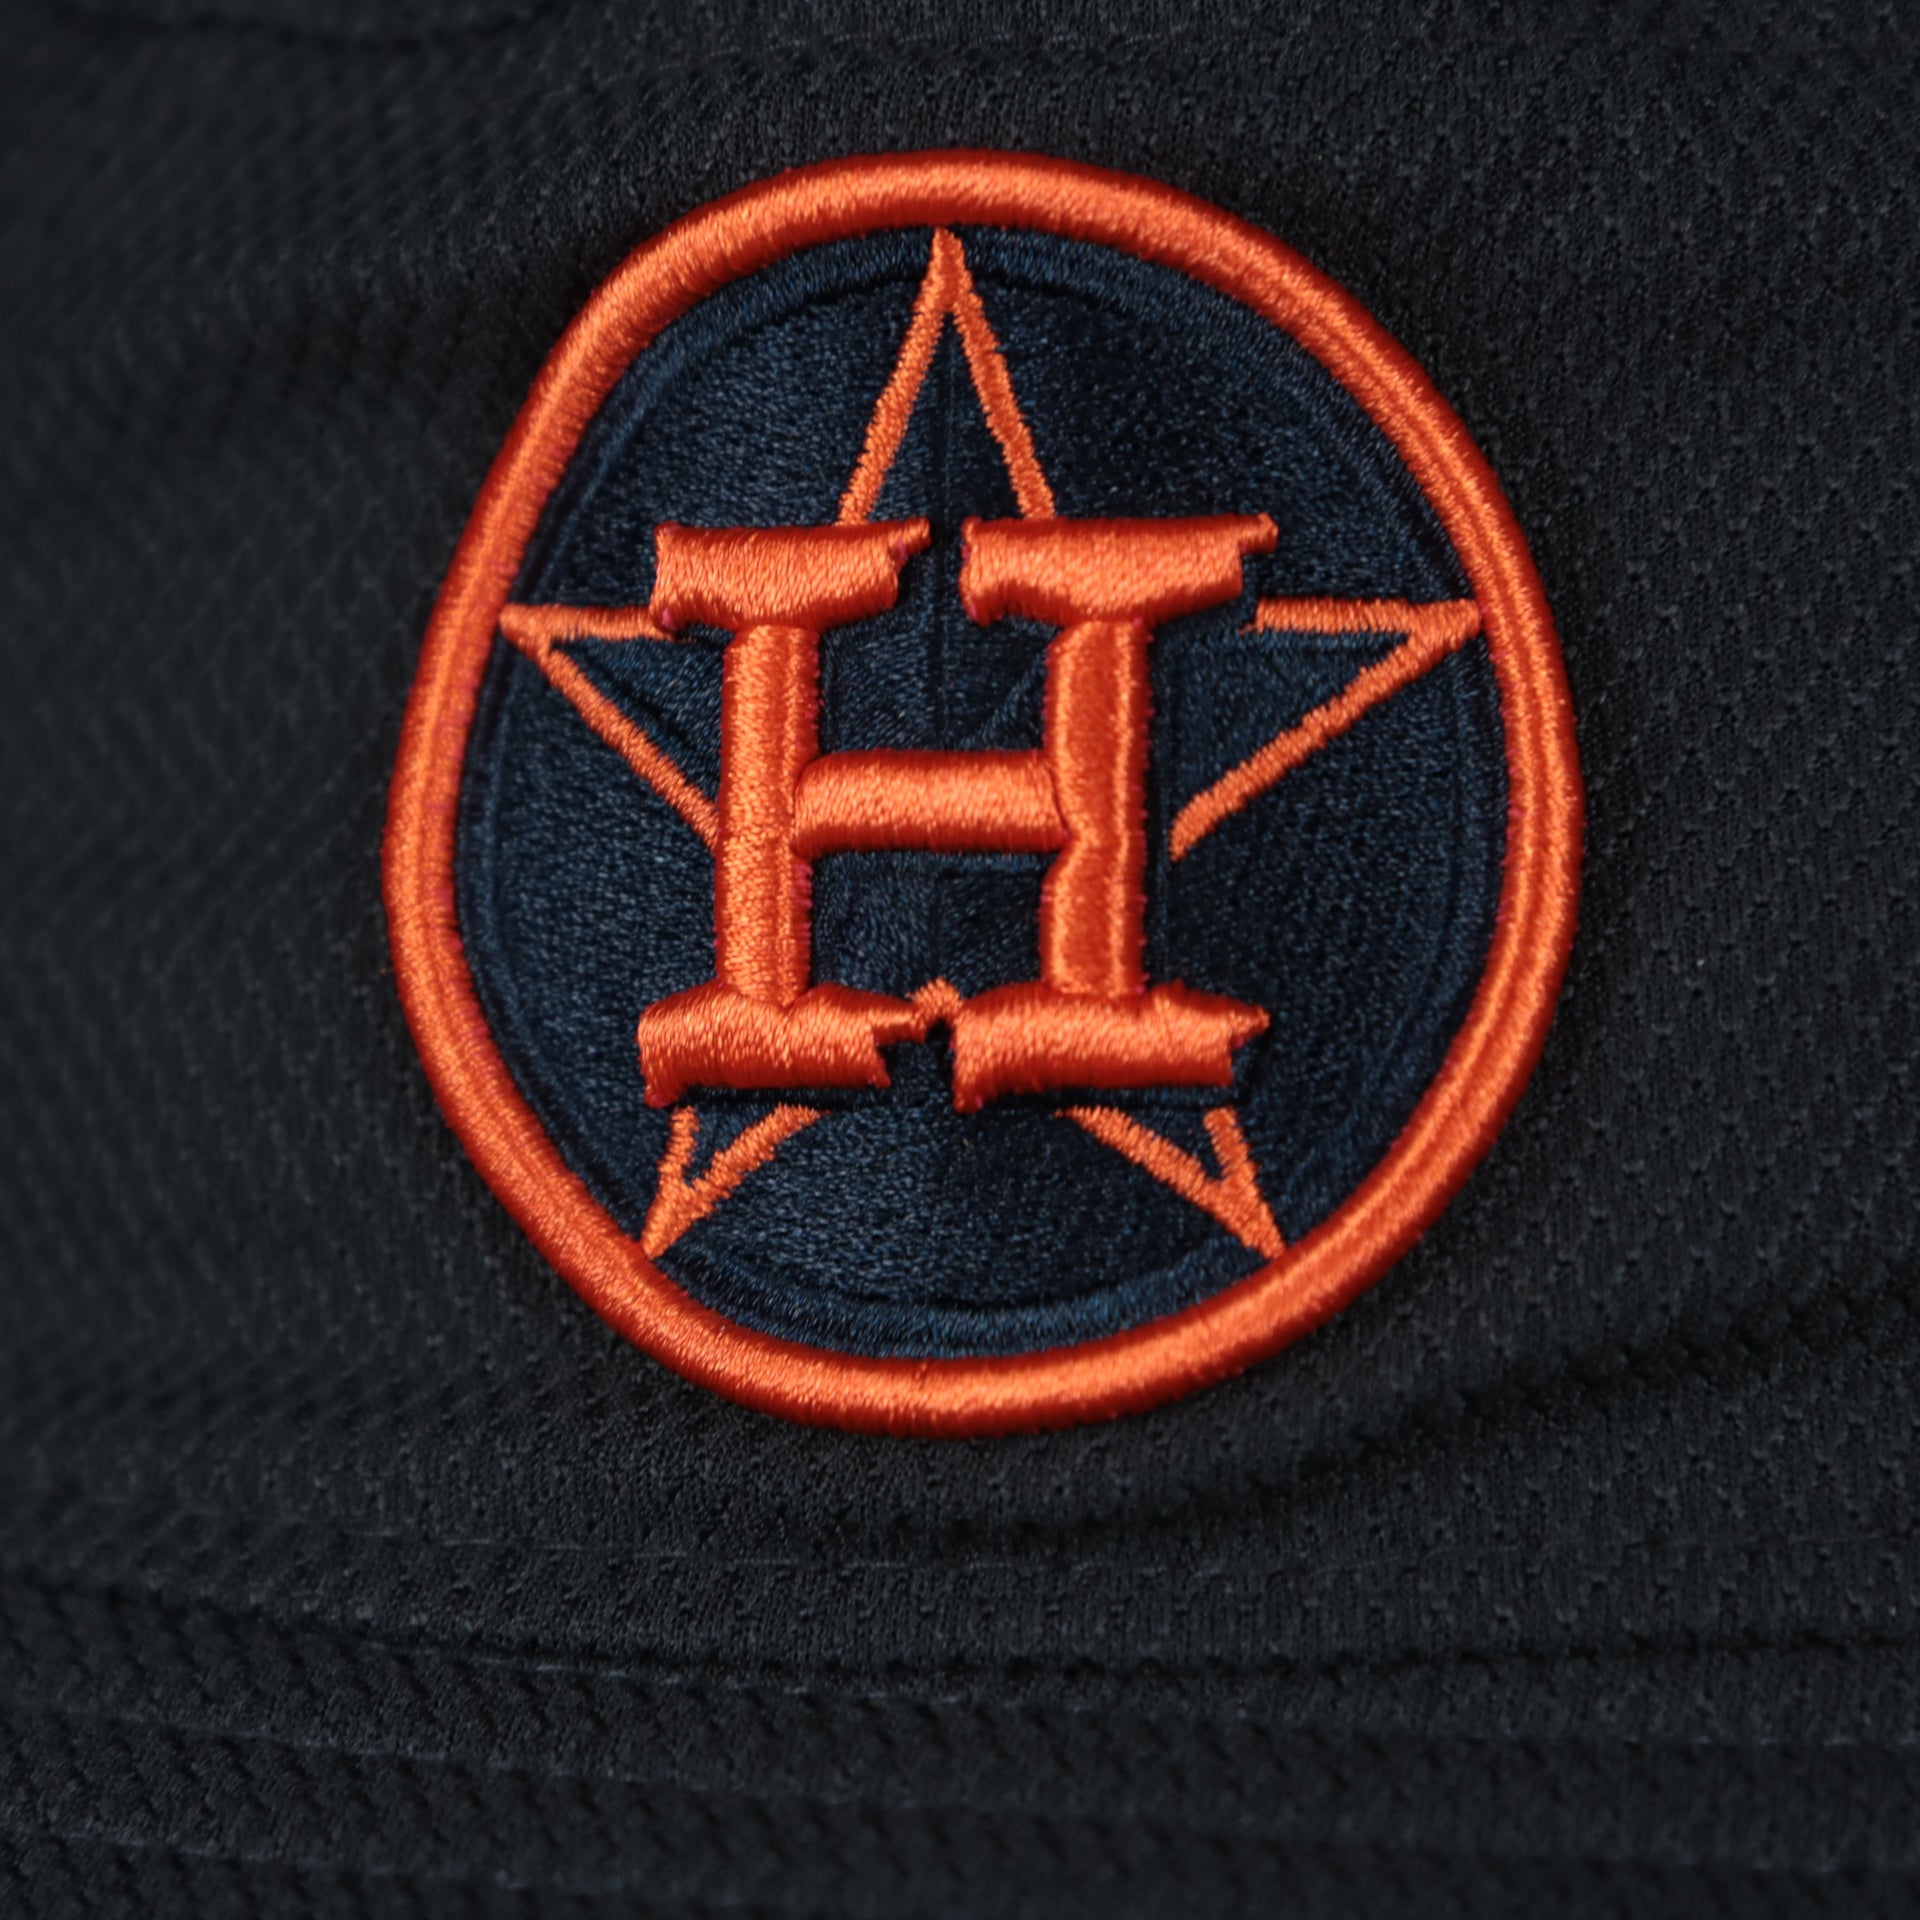 A close up of the Astros logo on the Houston Astros MLB 2022 Spring Training Onfield Bucket Hat